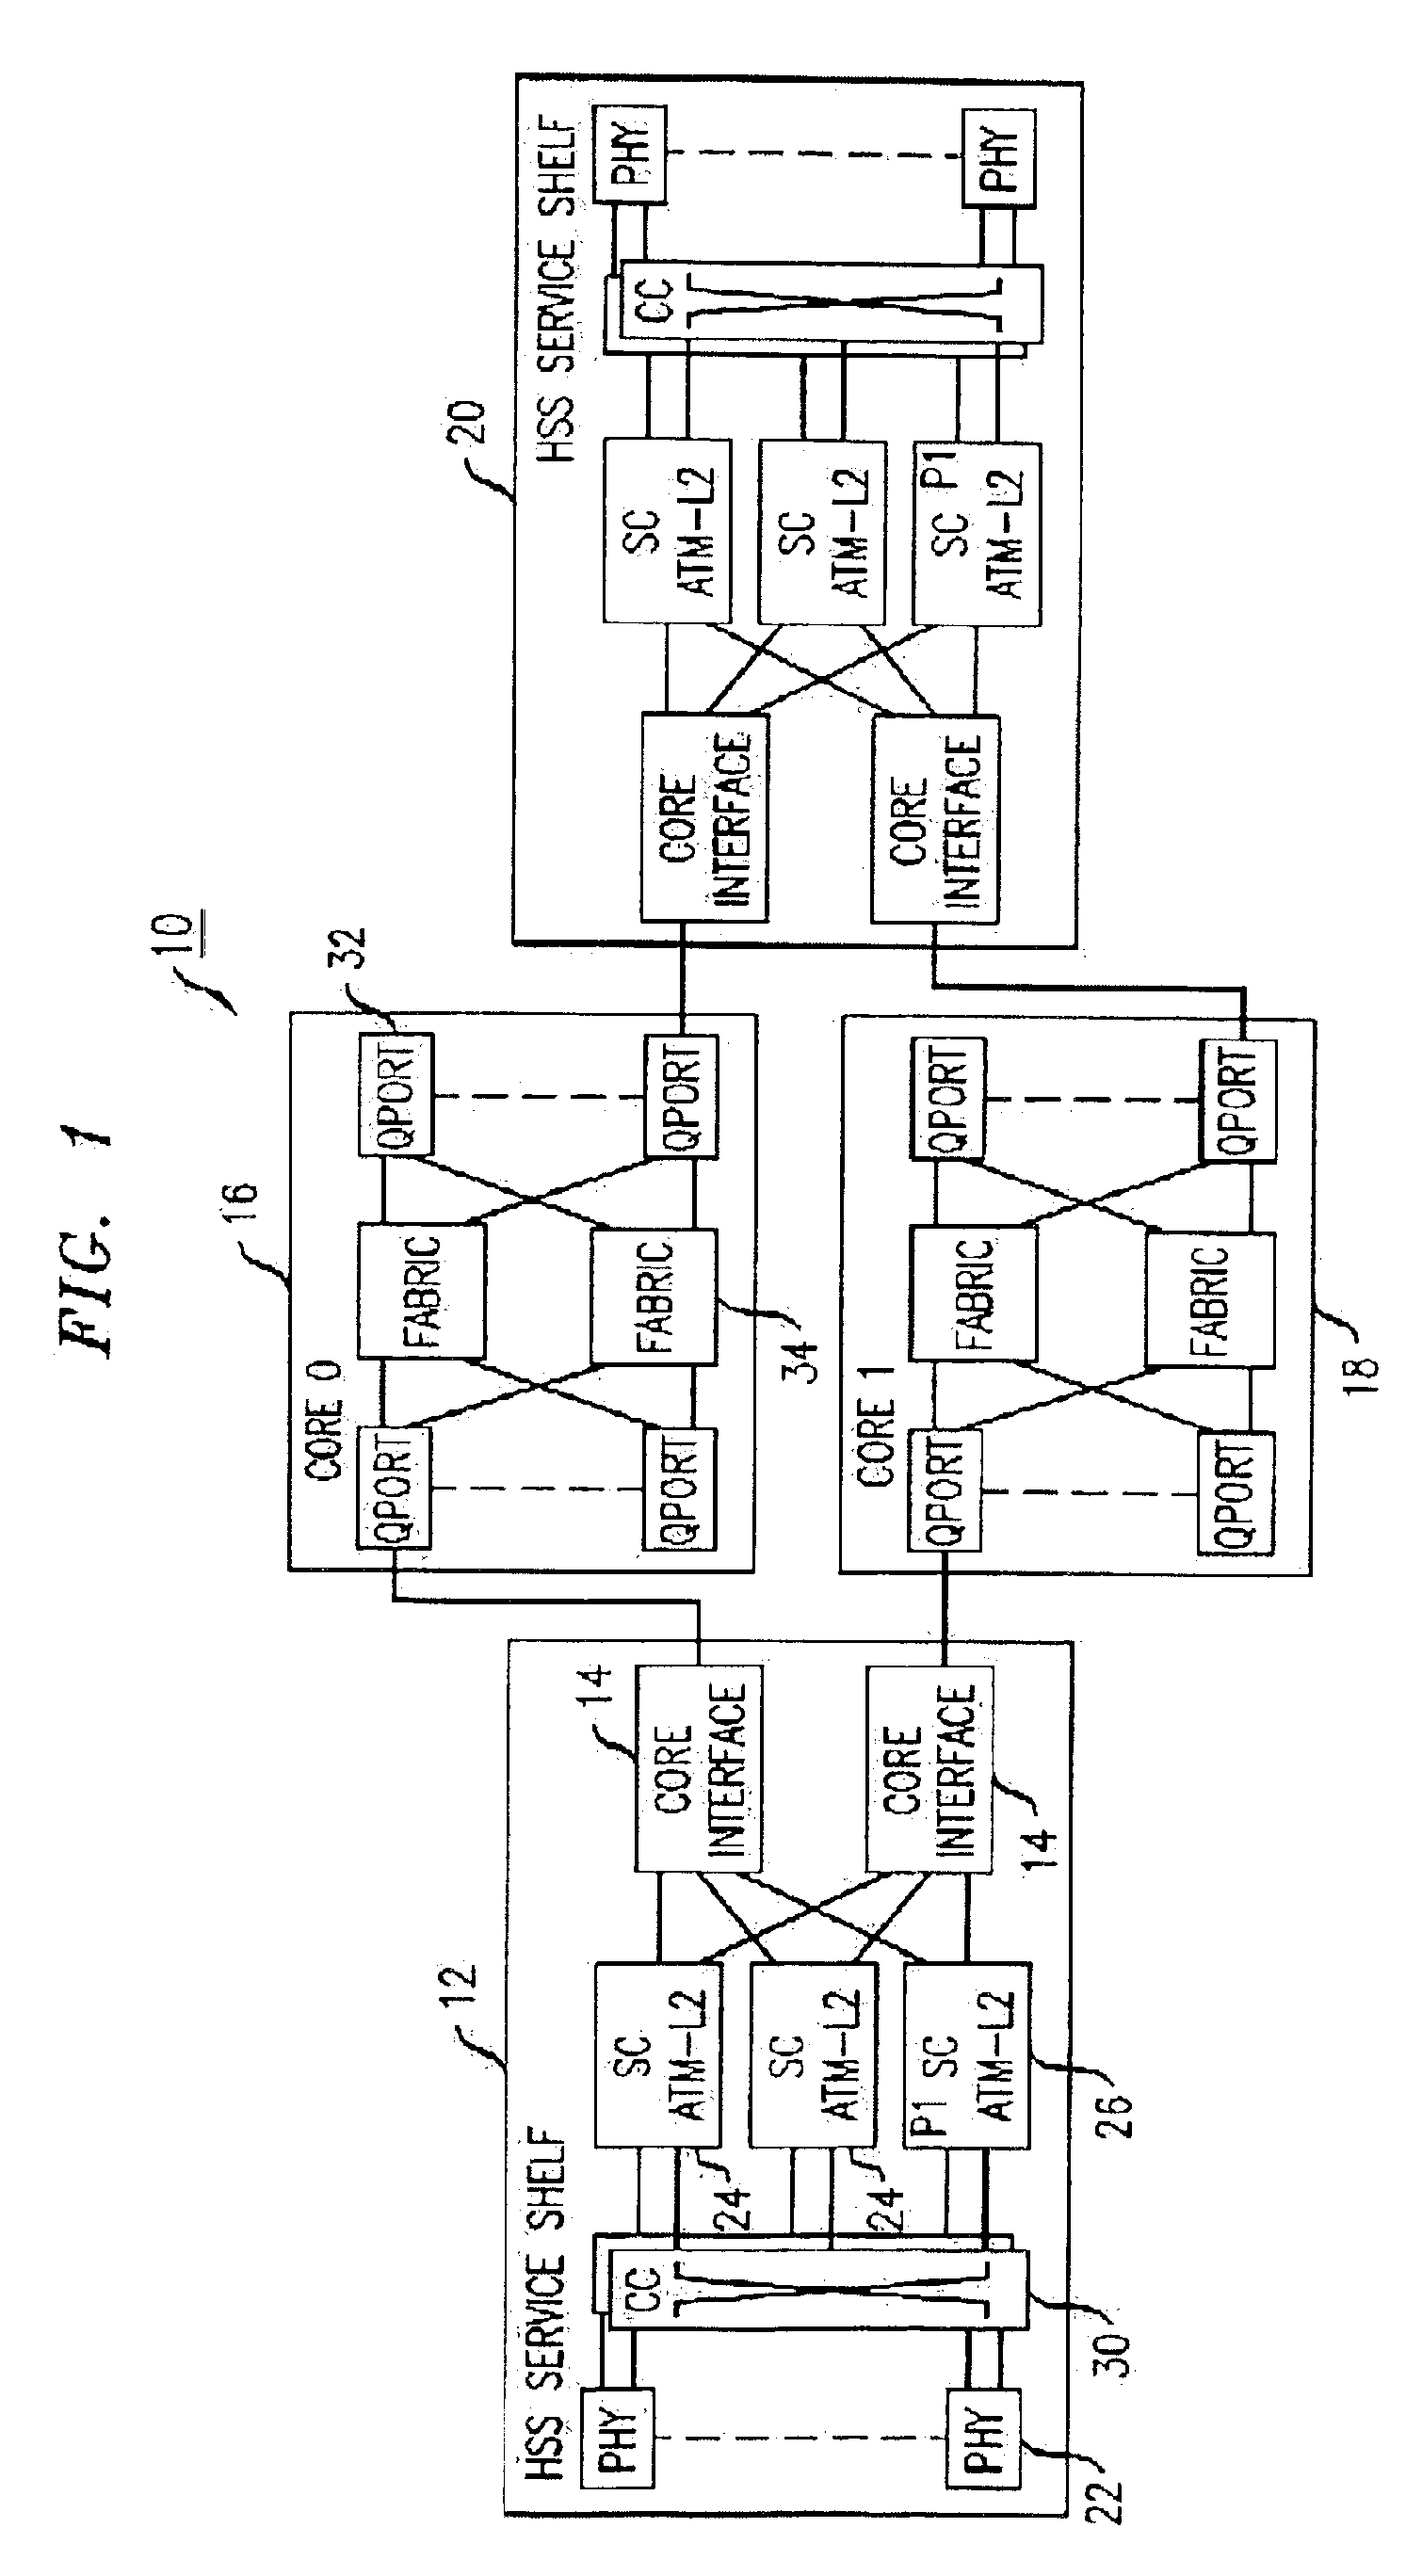 Controlled switchover of unicast and multicast data flows in a packet based switching system